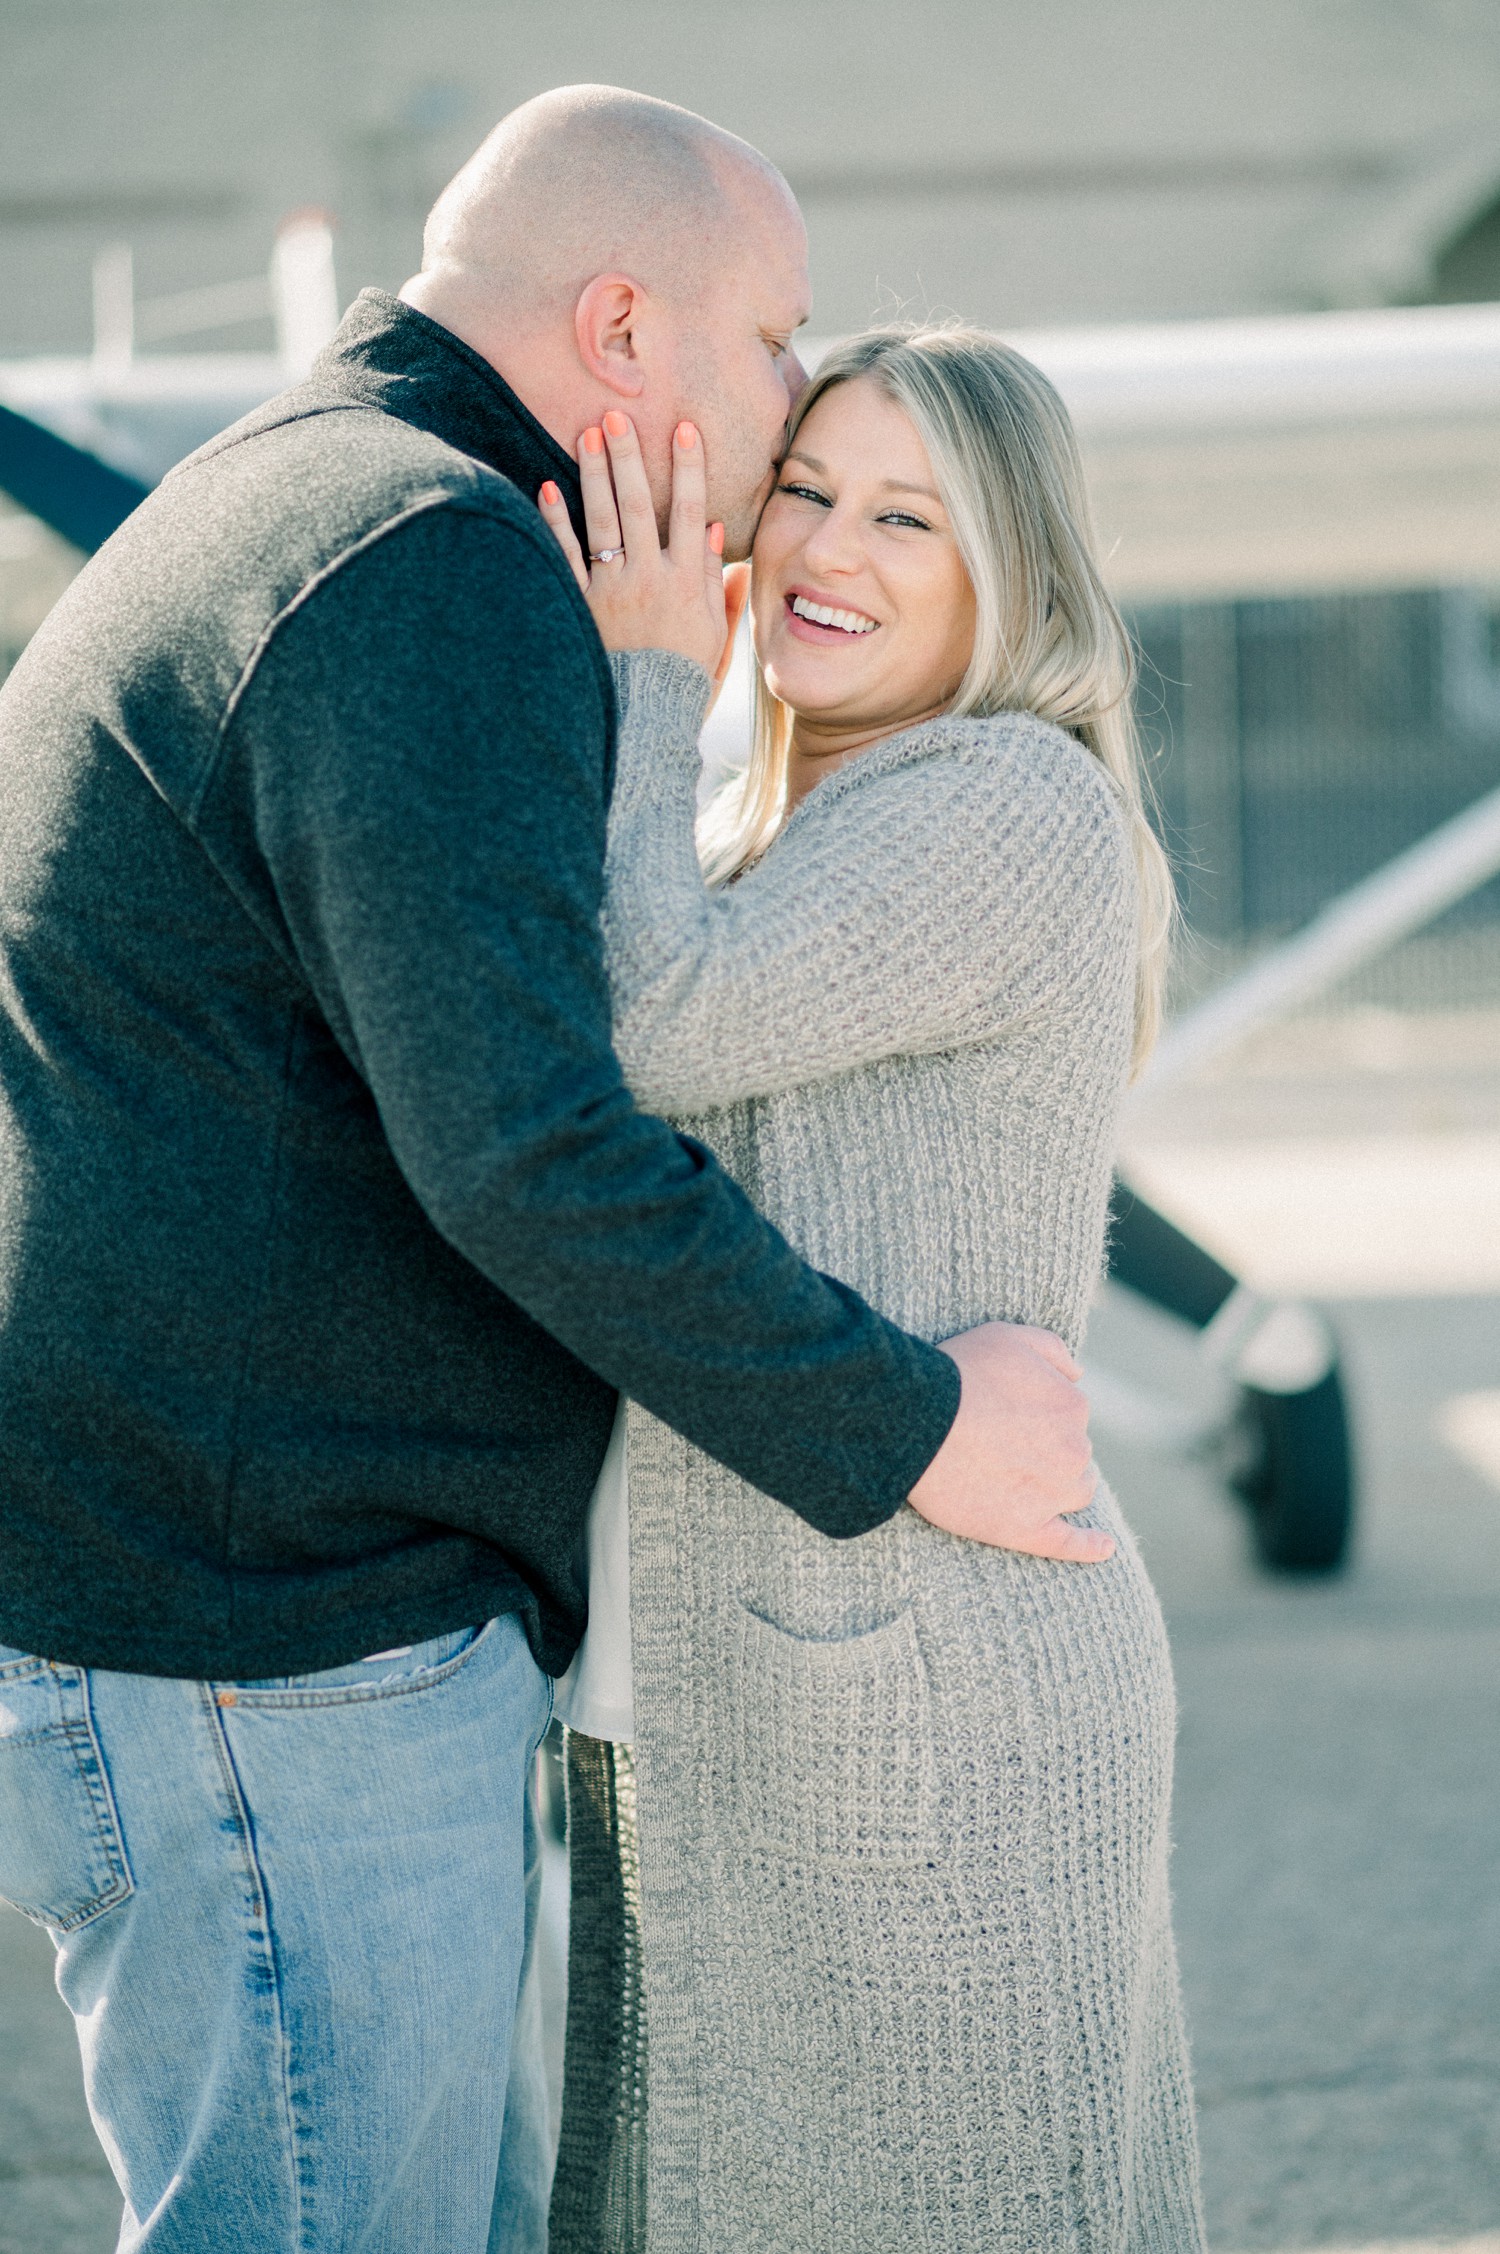 Guy kissing girl for engagement photos at airport.